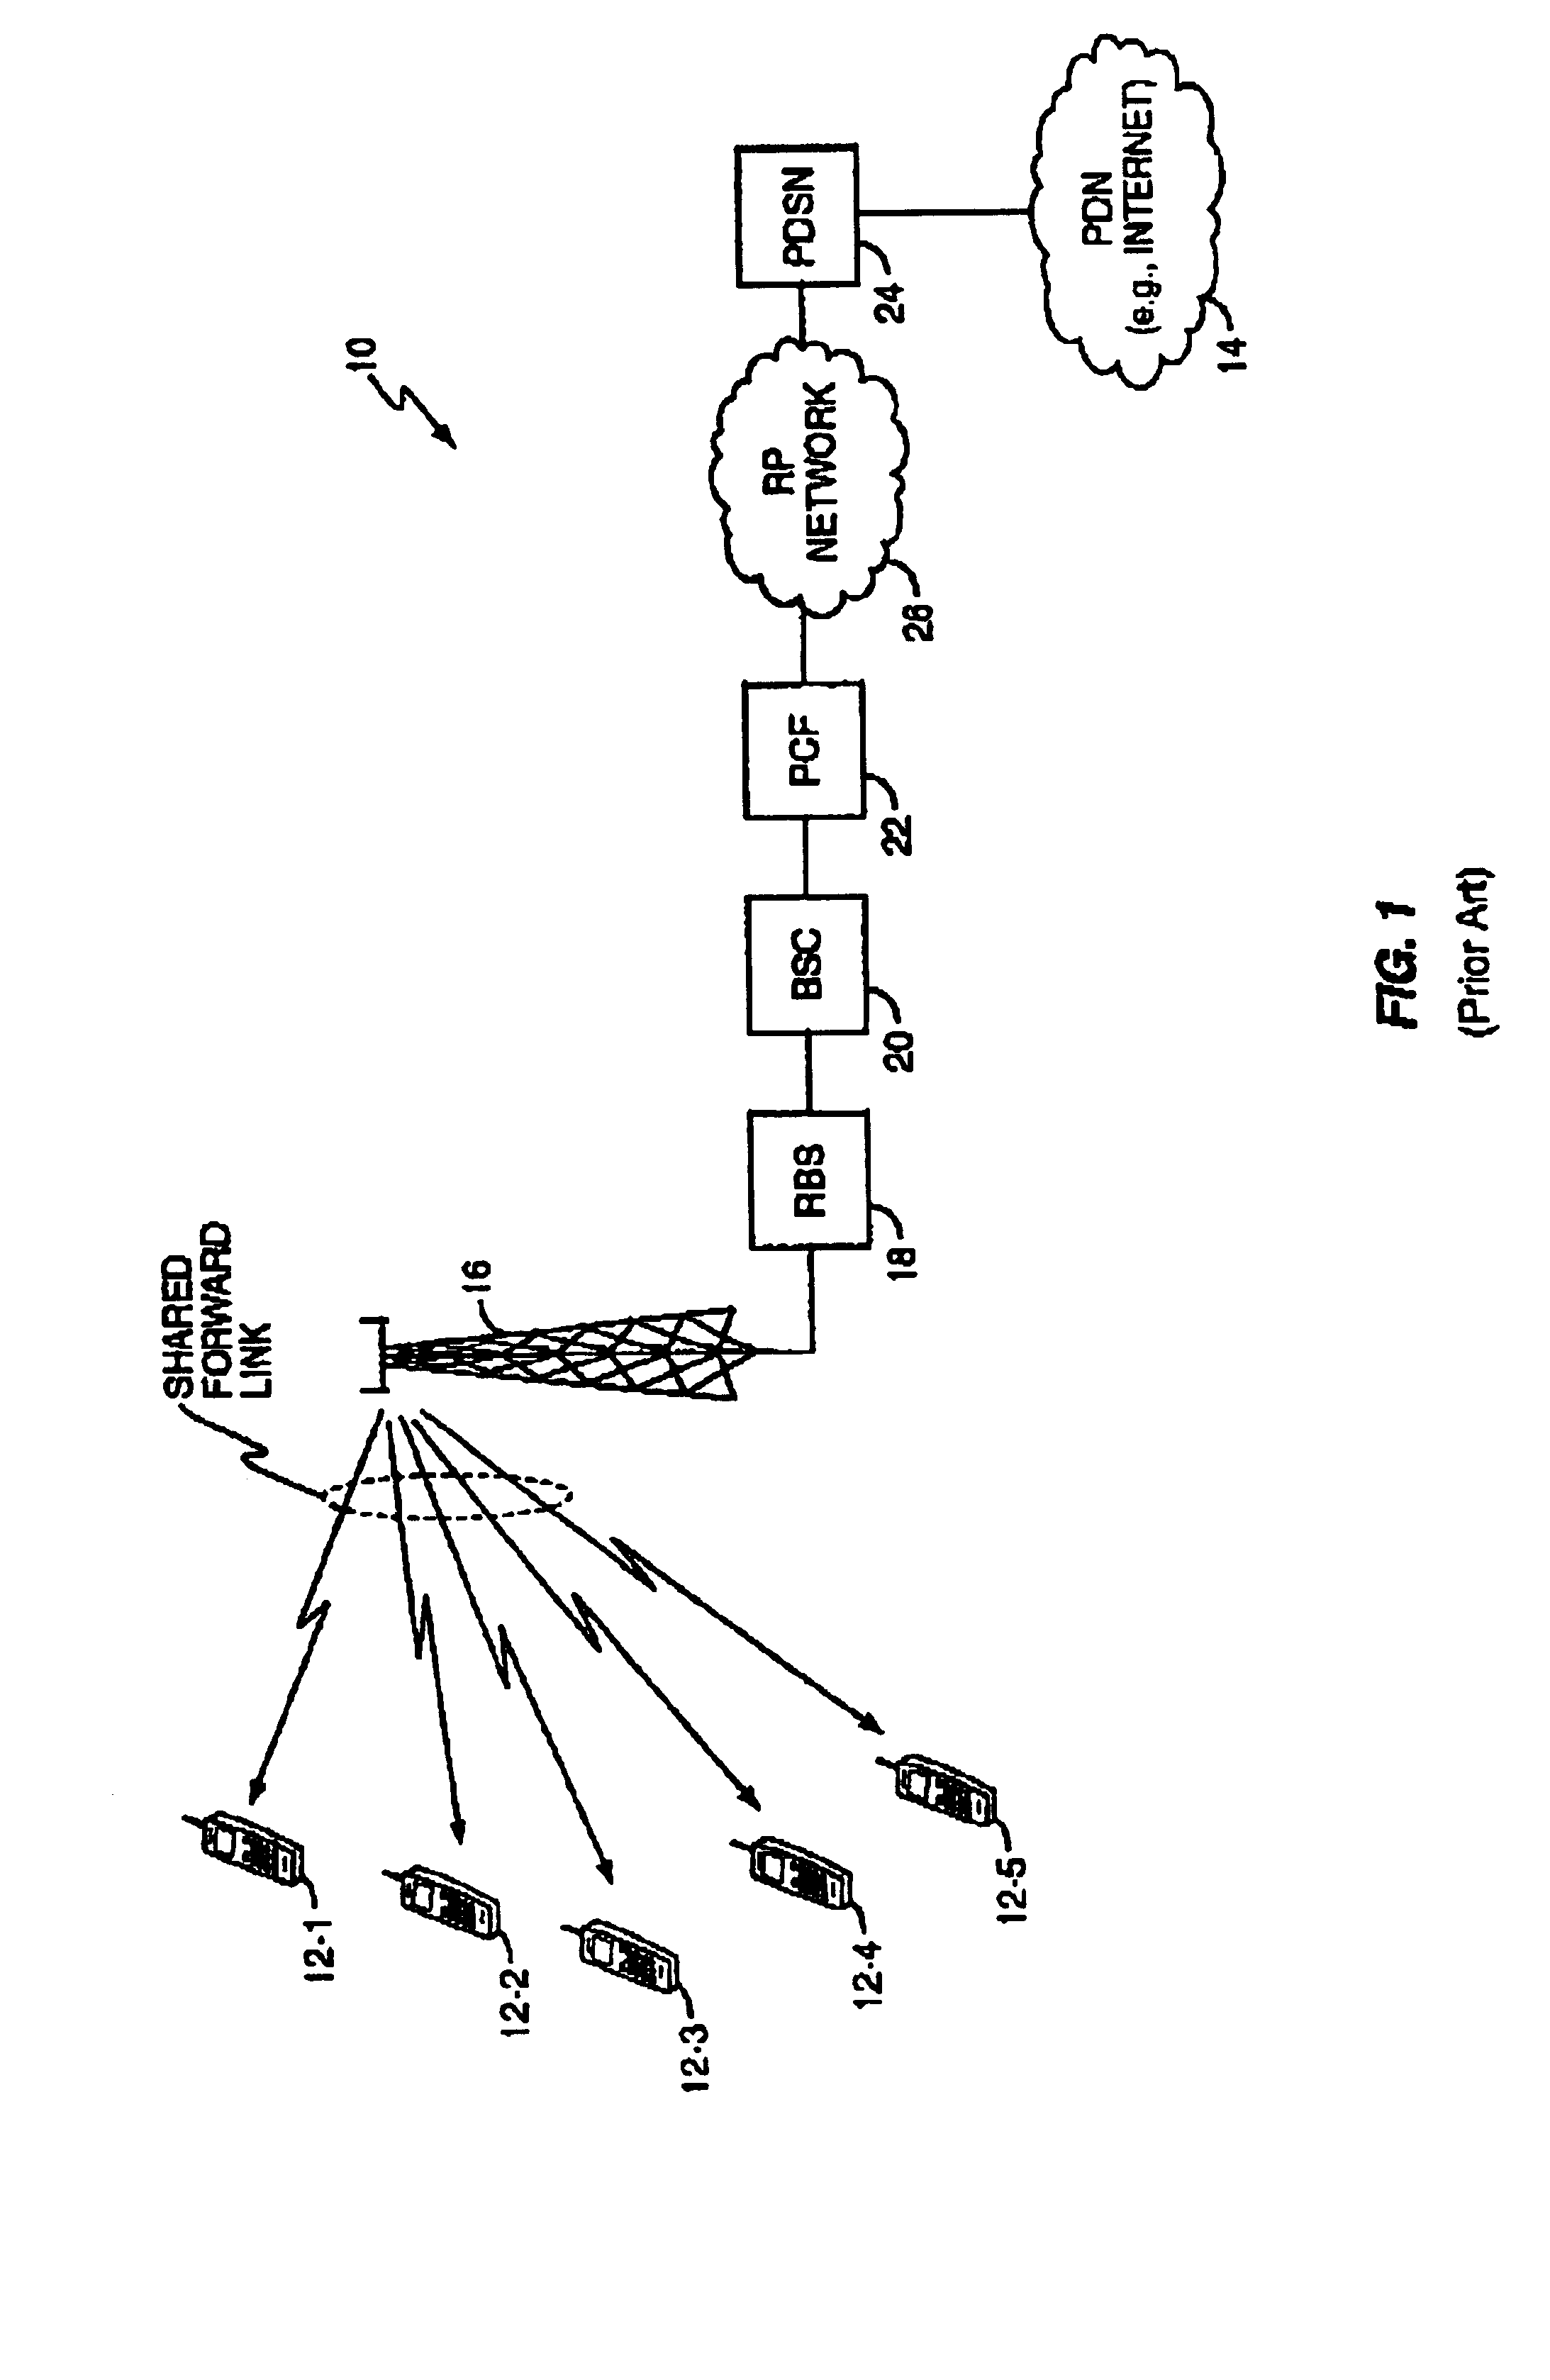 Air interface scheduler for wireless communication networks